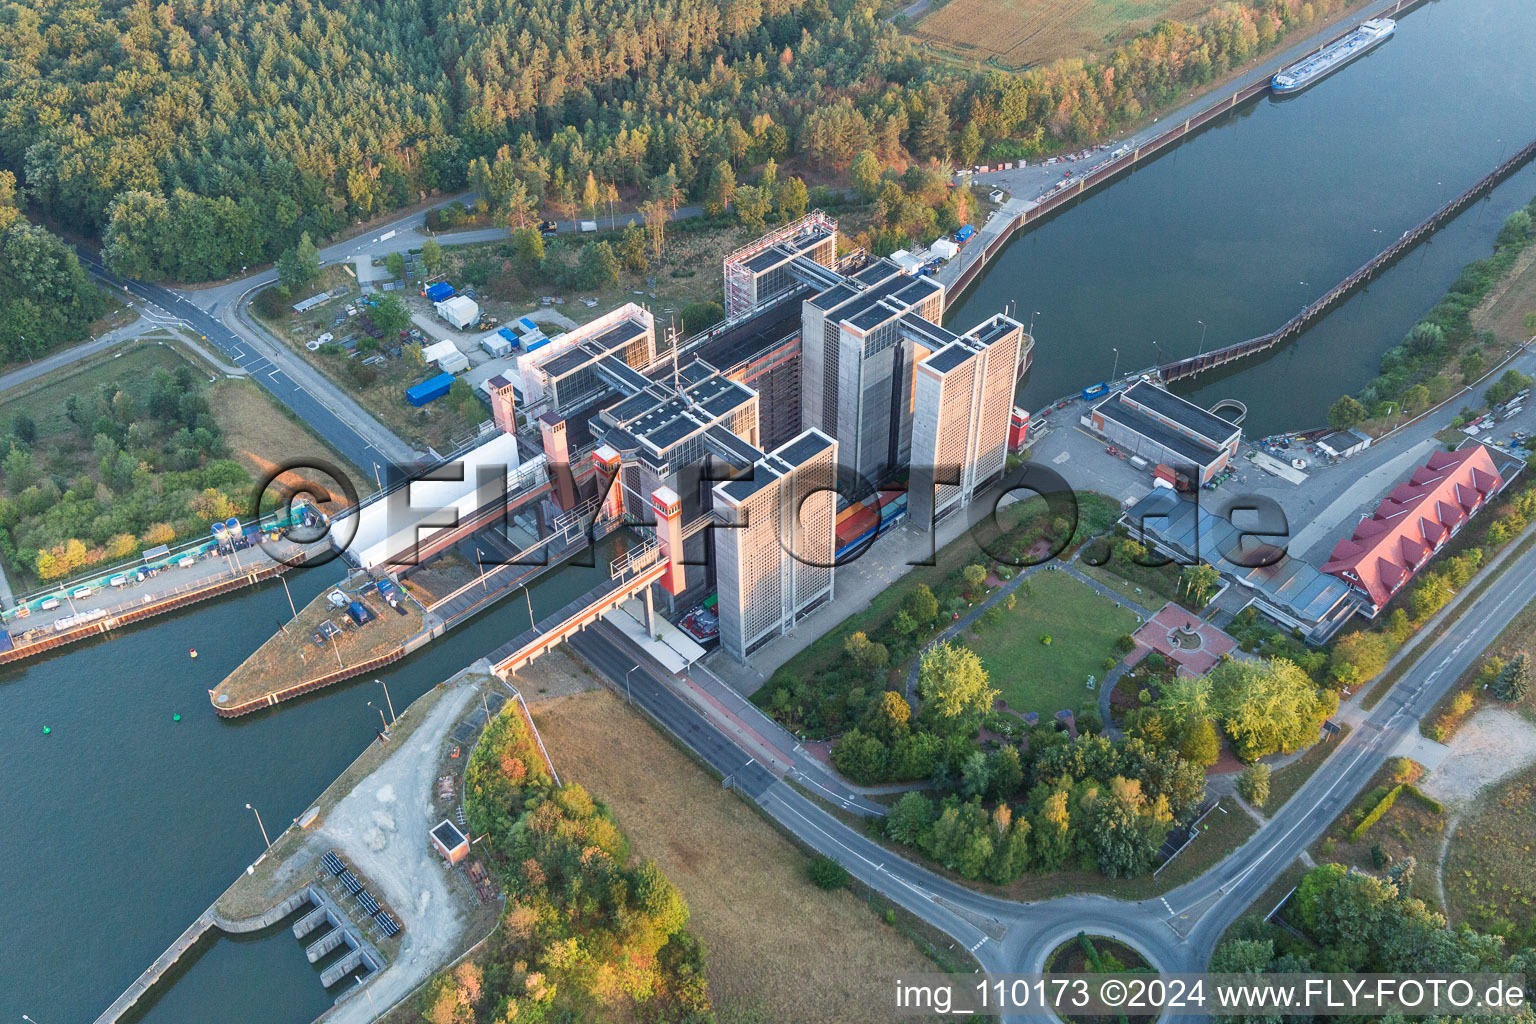 Boat lift and locks plants on the banks of the waterway of the Elbe side channel in Scharnebeck in the state Lower Saxony, Germany from a drone